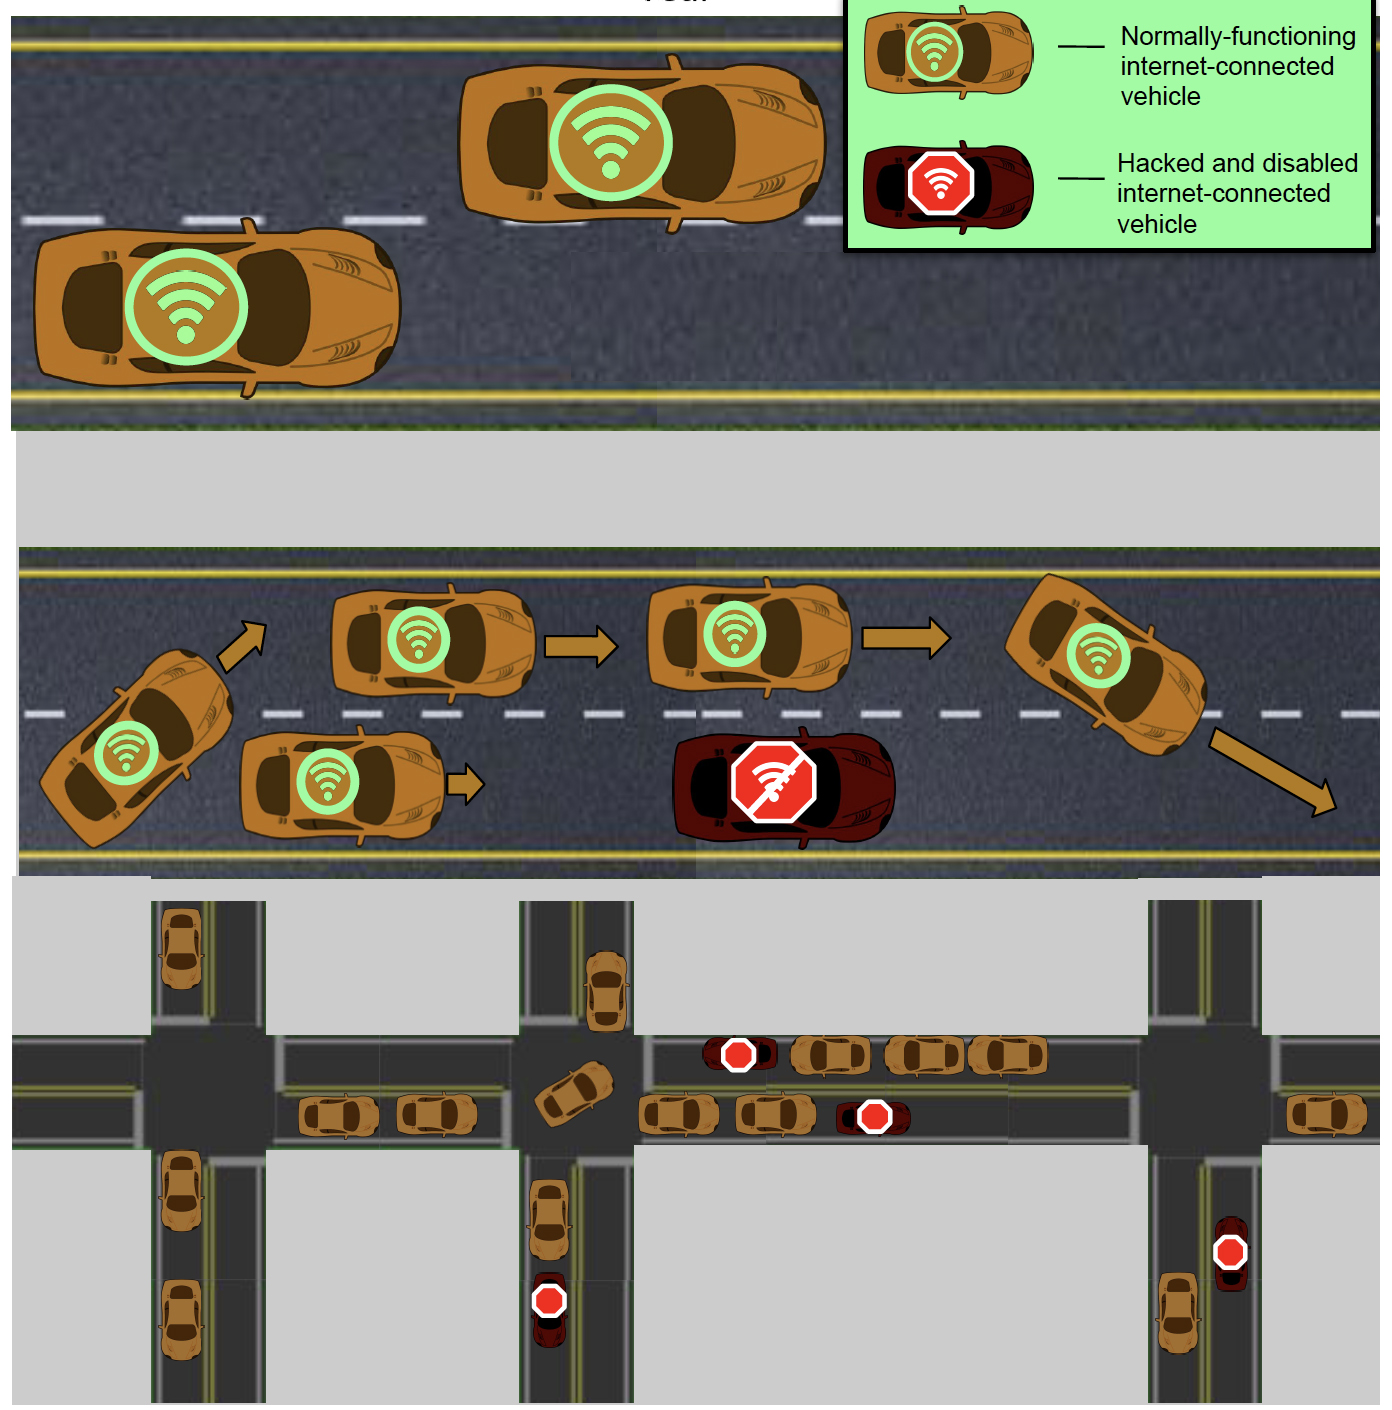 Stranded self-driving or other connected cars are designated with a red stop sign on their roofs. The lower section depicts situations in which stranded cars can block traffic without shutting down all lanes. They must merely become impediments that other cars can't circumvent. Credit: Yunker/Vivek/Yanni/Georgia Tech